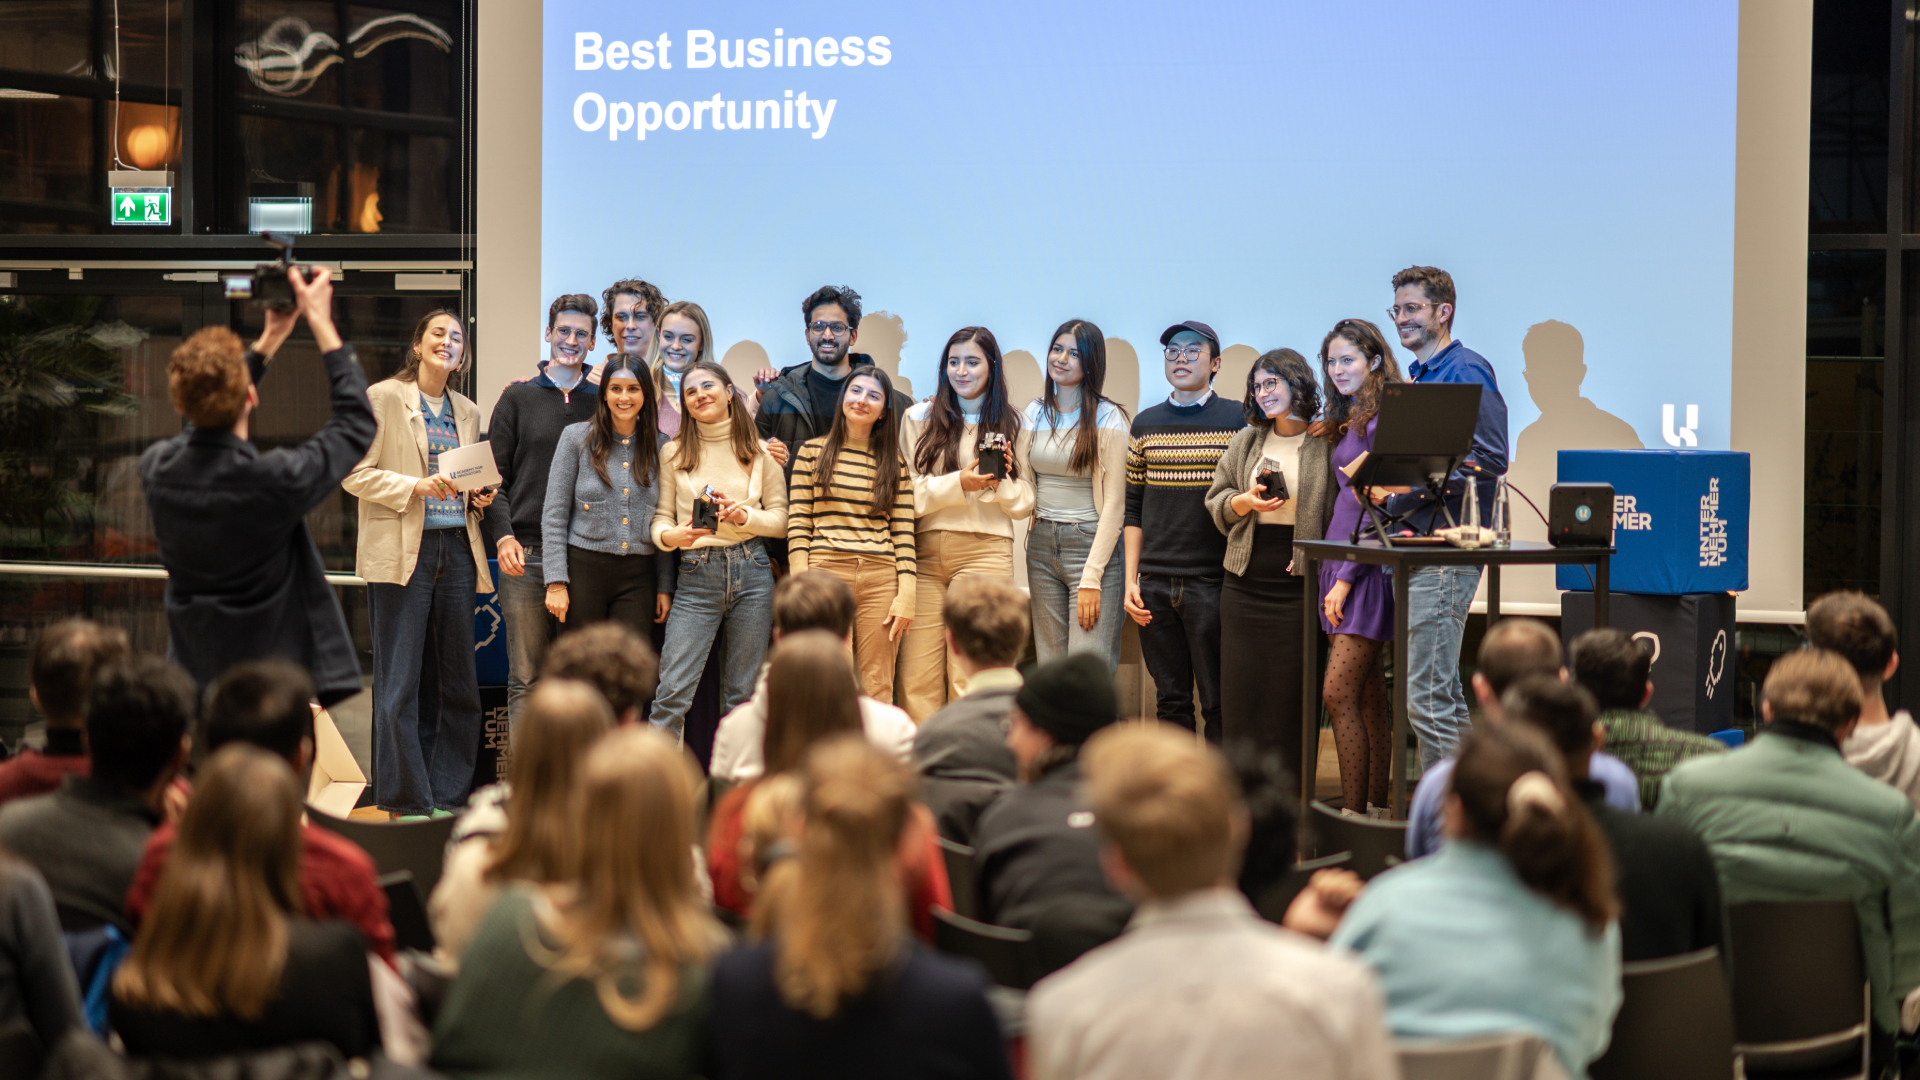 Students pitch their business ideas on stage